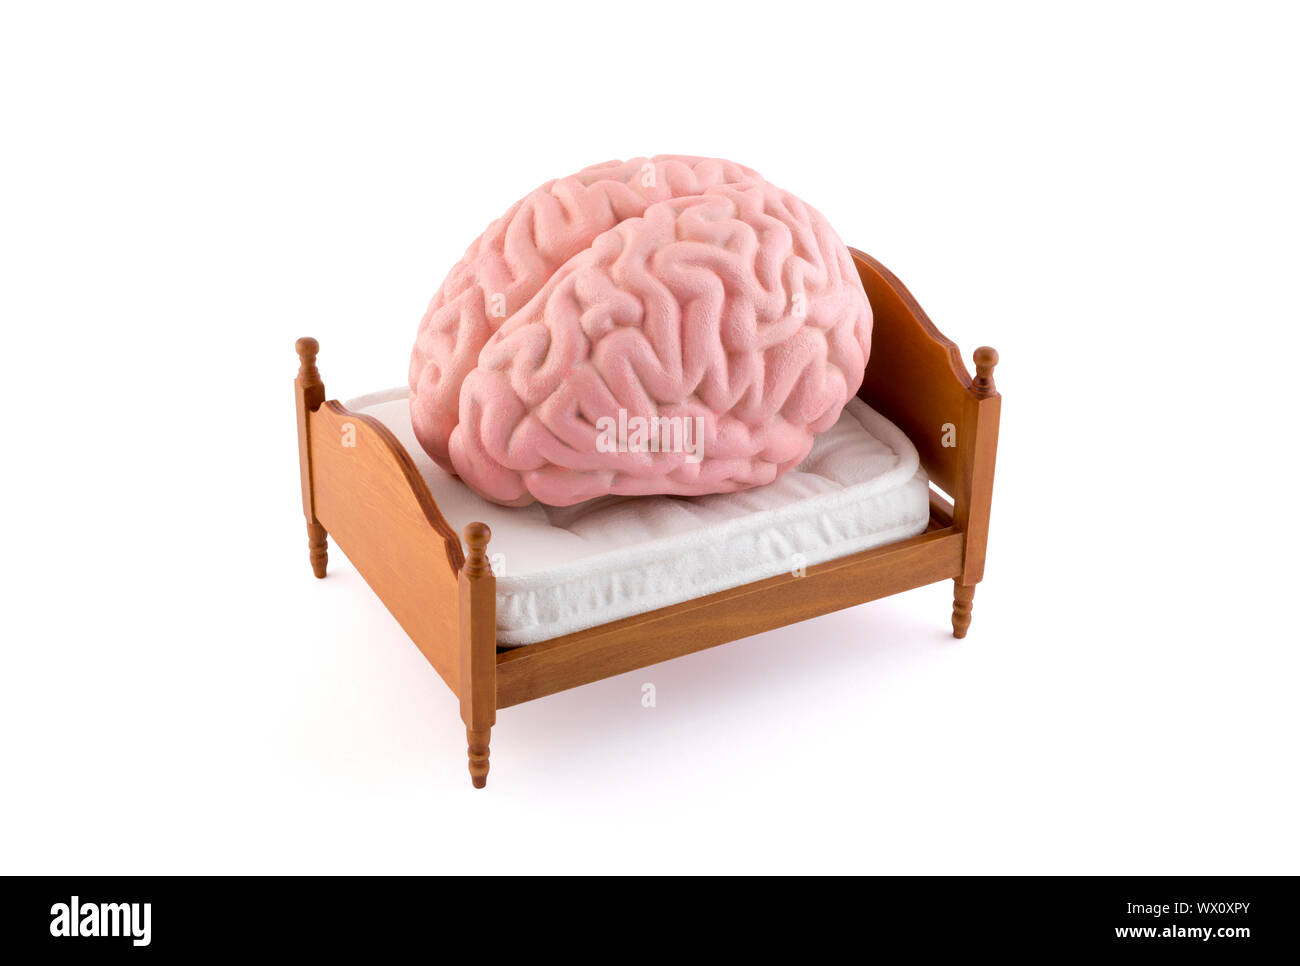 Human brain resting on the bed isolated on white background Stock Photo